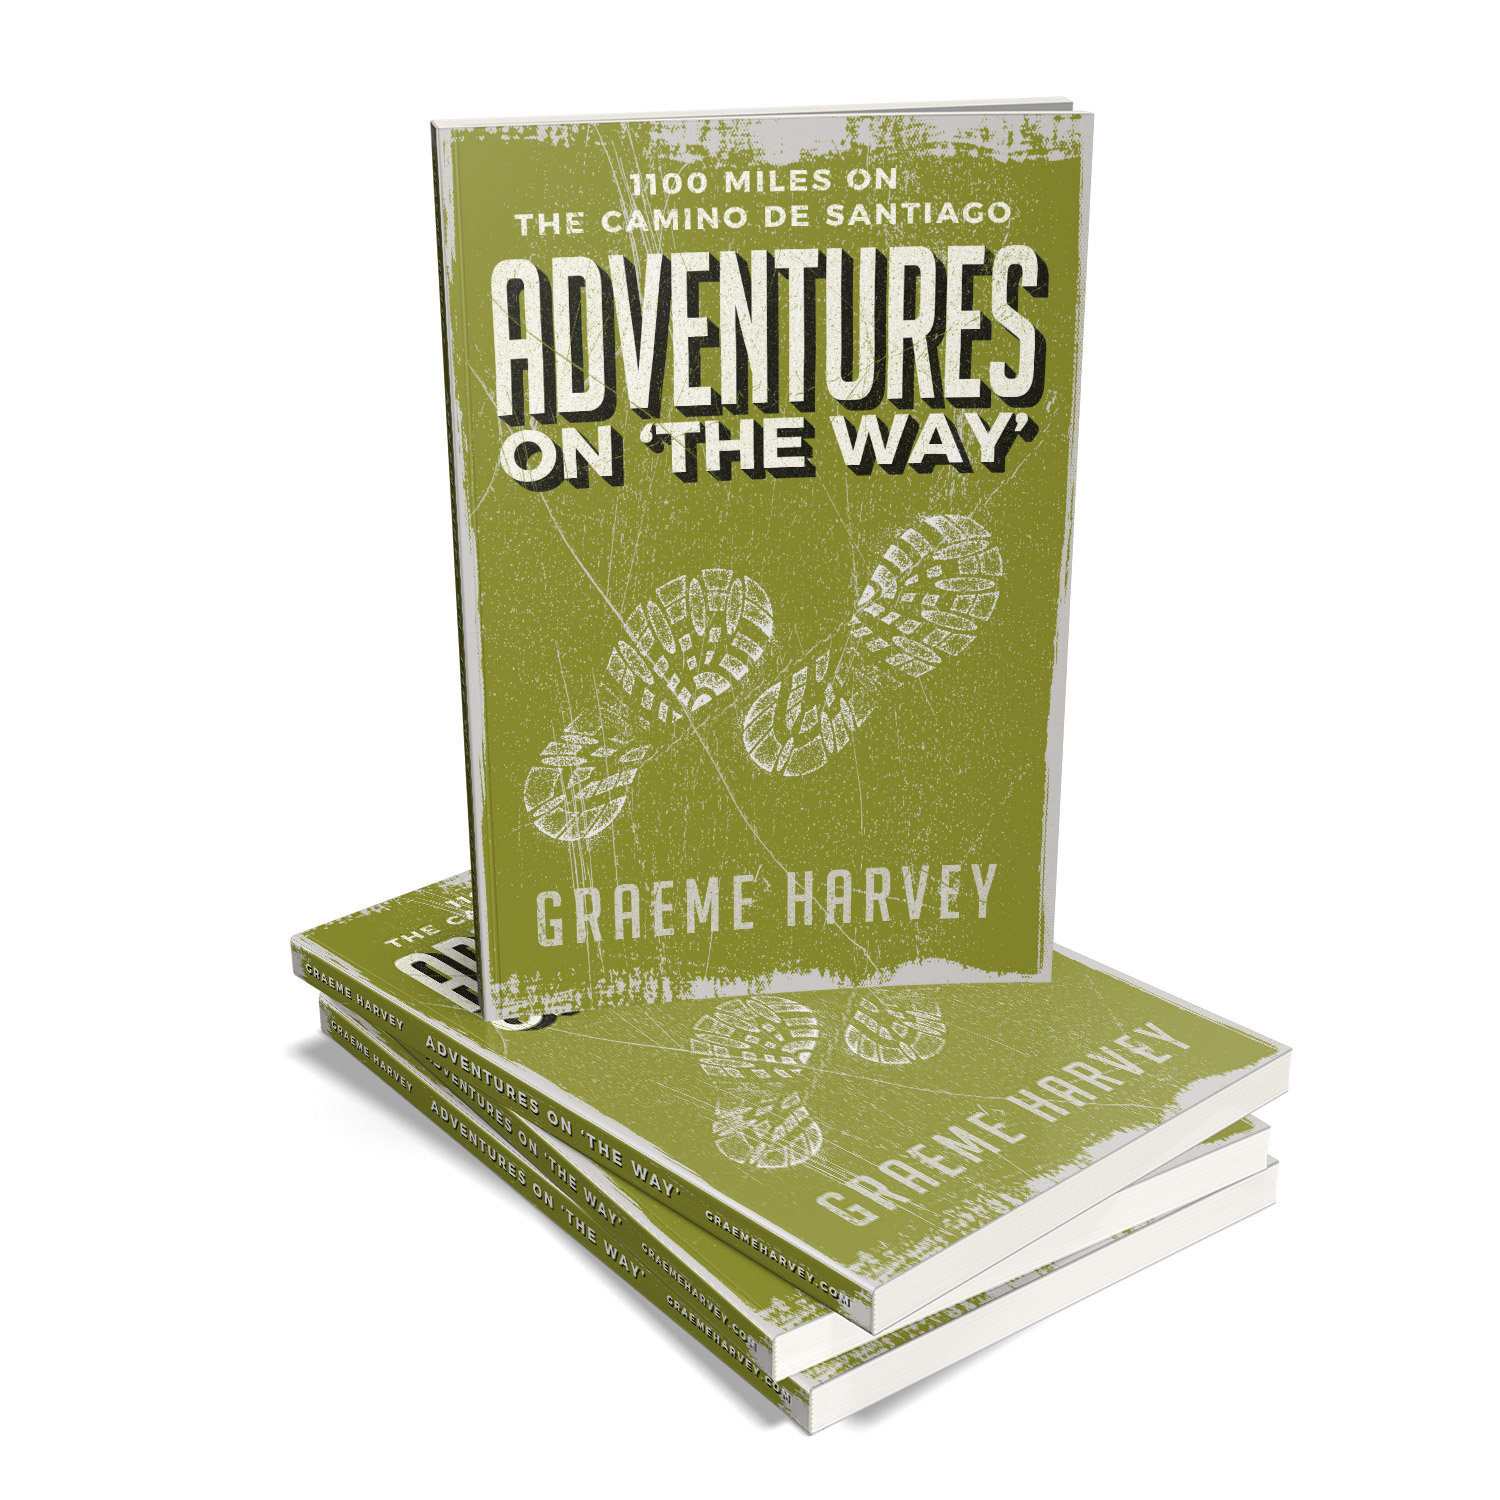 Various books of hiking, walking, running and trekking across some challenging tracts of land. The author is Graeme Harvey. The book cover designs are by Mark Thomas. To learn more about what Mark could do for your book, please visit coverness.com.